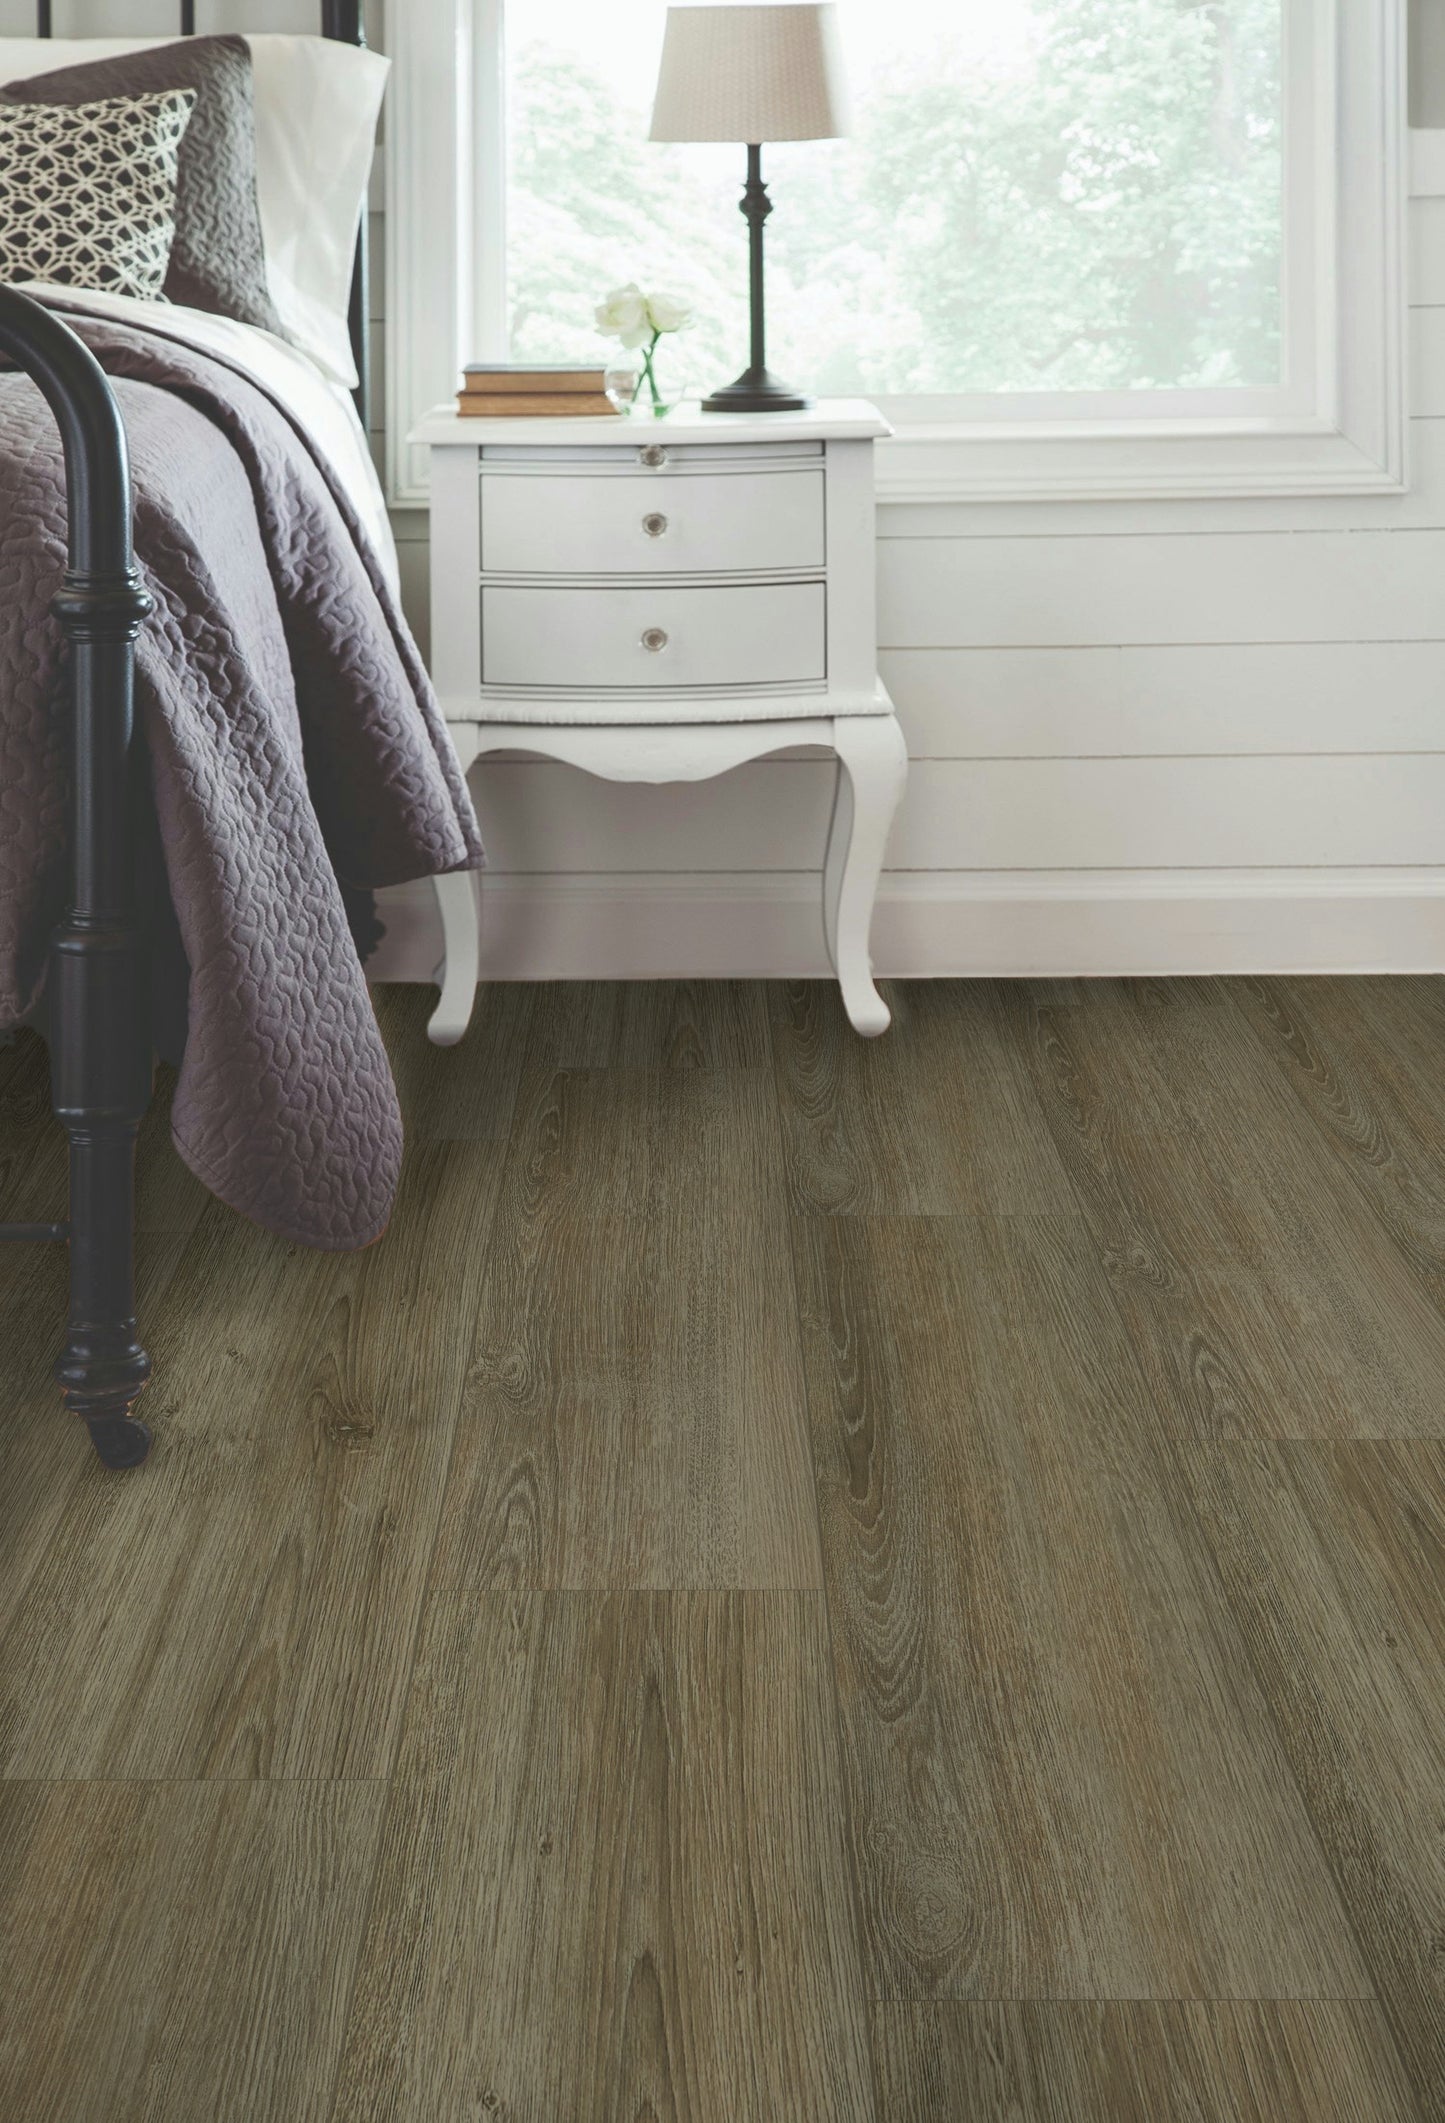 5mm Thick Rigid Core Vinyl Plank Flooring 7.87 in. Width x 60 in. Length (32.81 sq. ft. per box) - Lake House